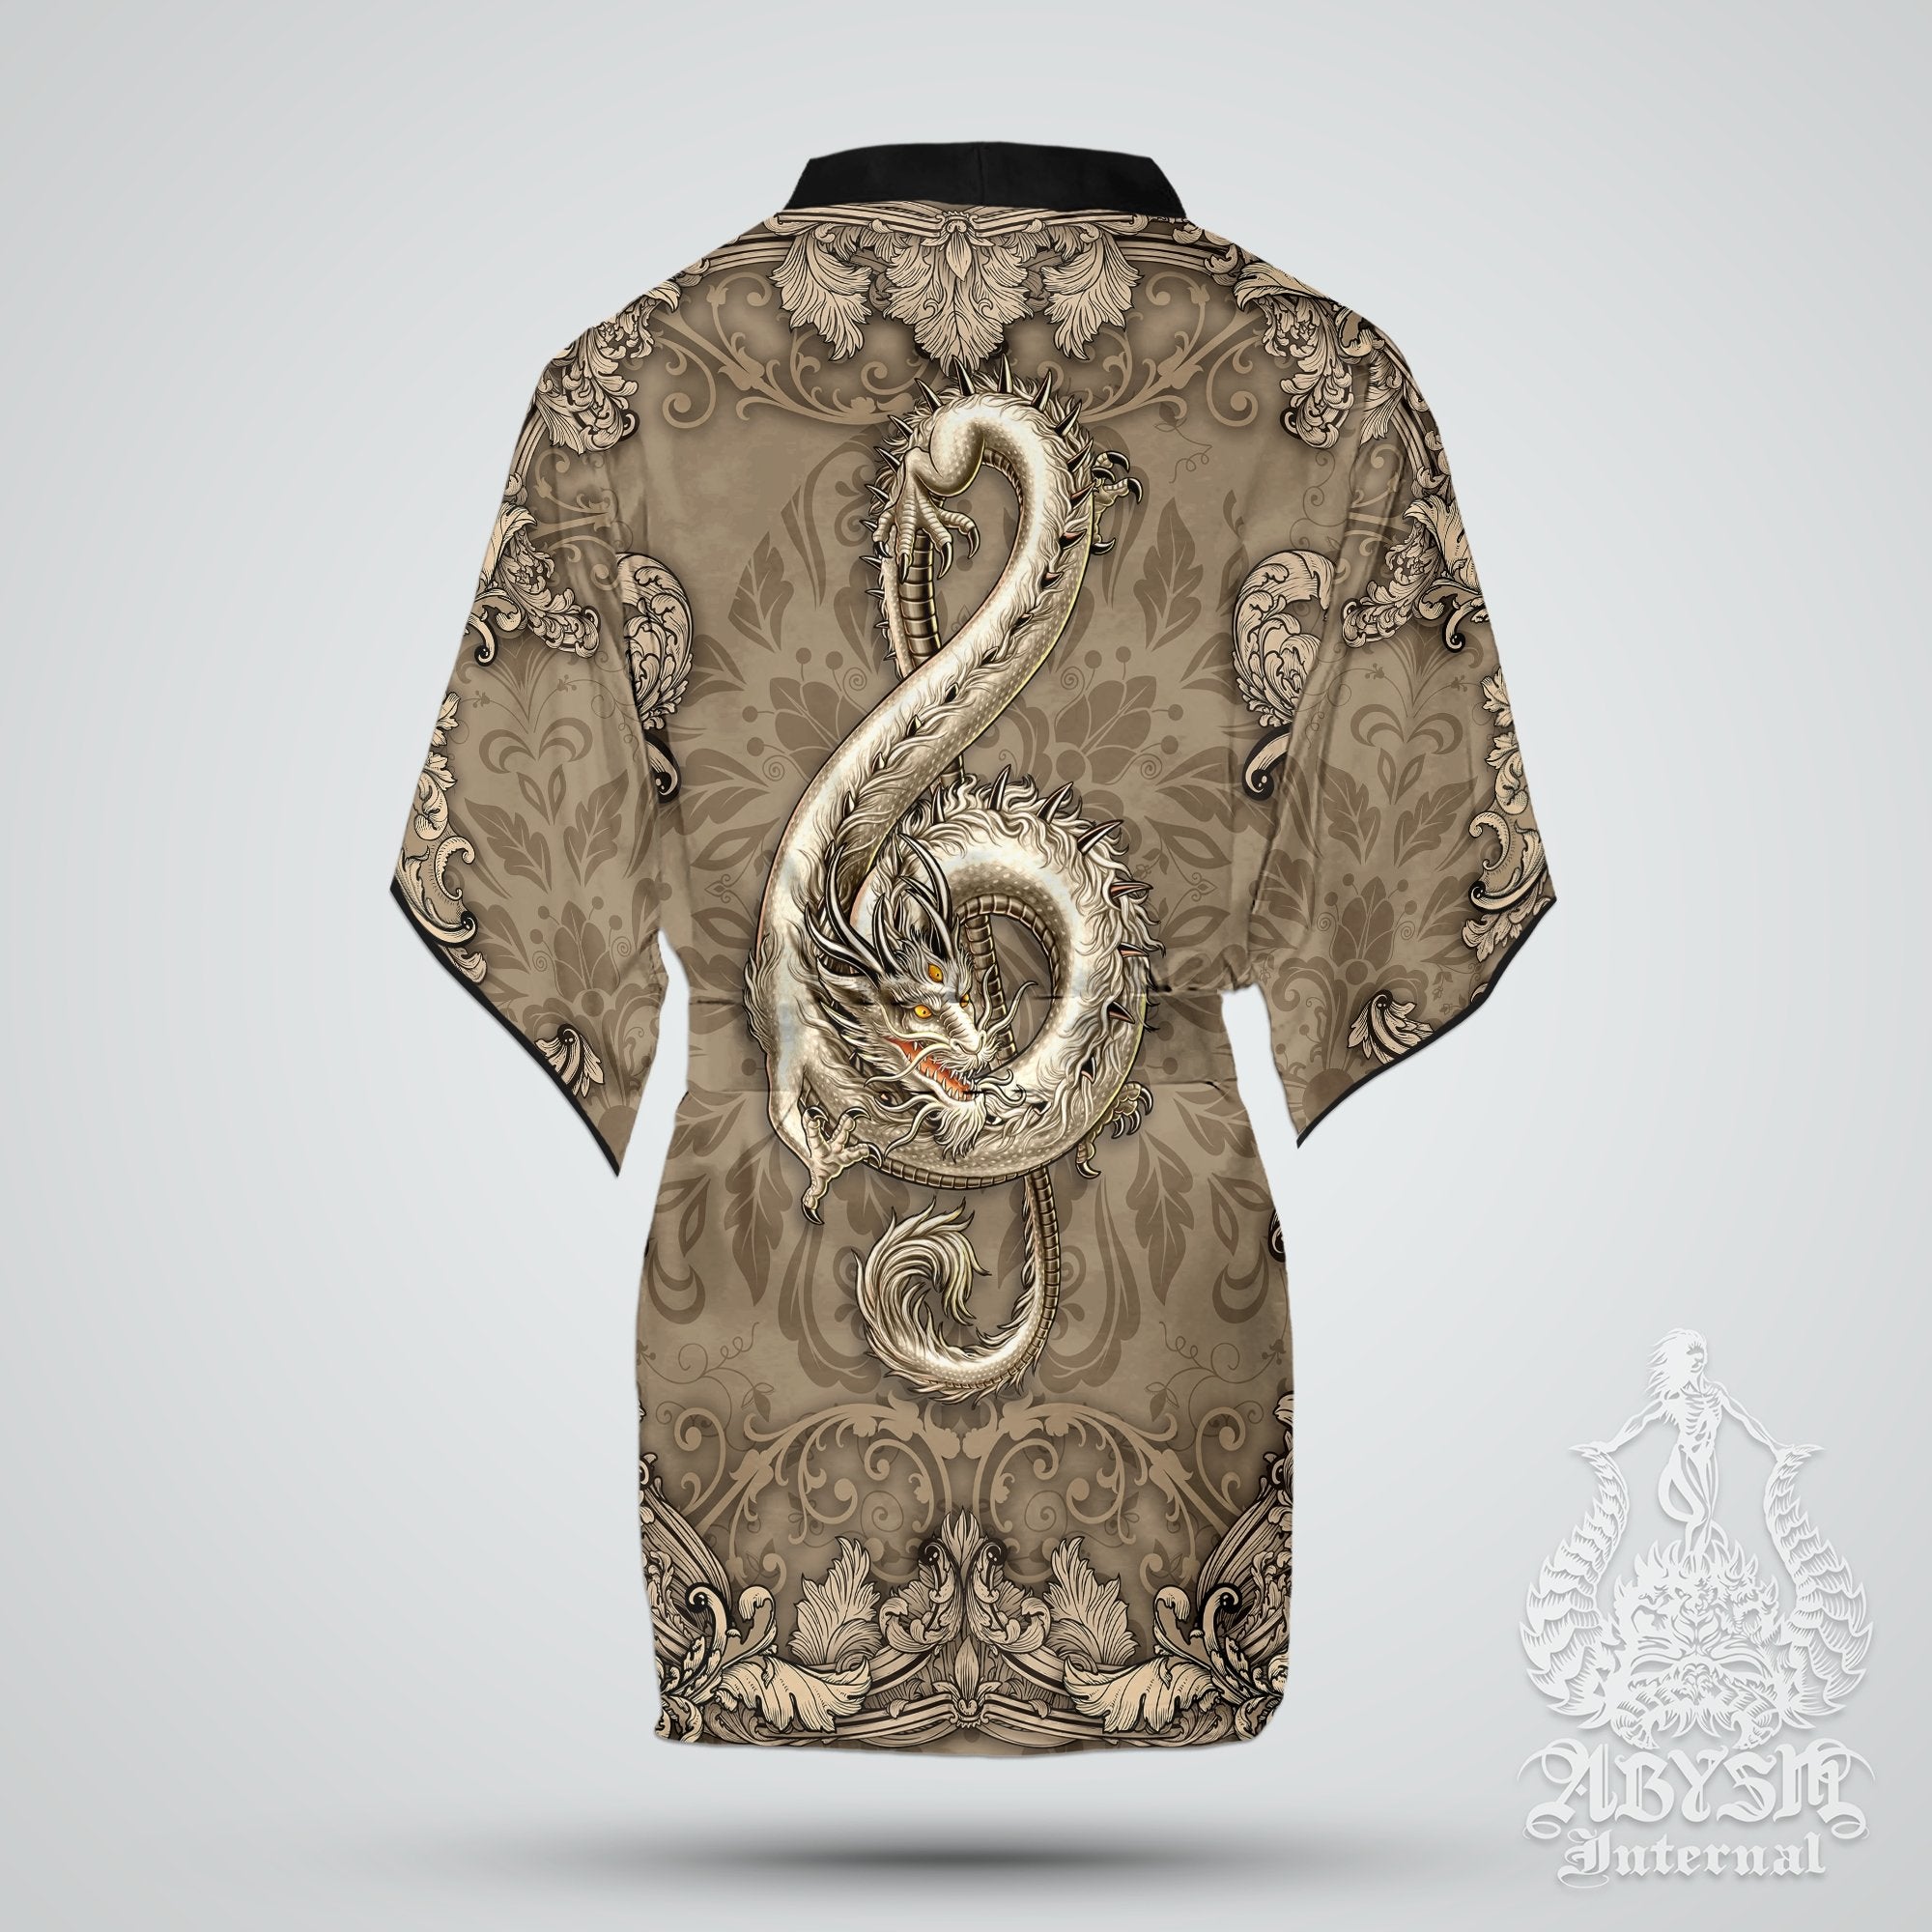 Music Cover Up, Beach Outfit, Party Kimono, Summer Festival Robe, Indie and Alternative Clothing, Unisex - Dragon, Cream - Abysm Internal